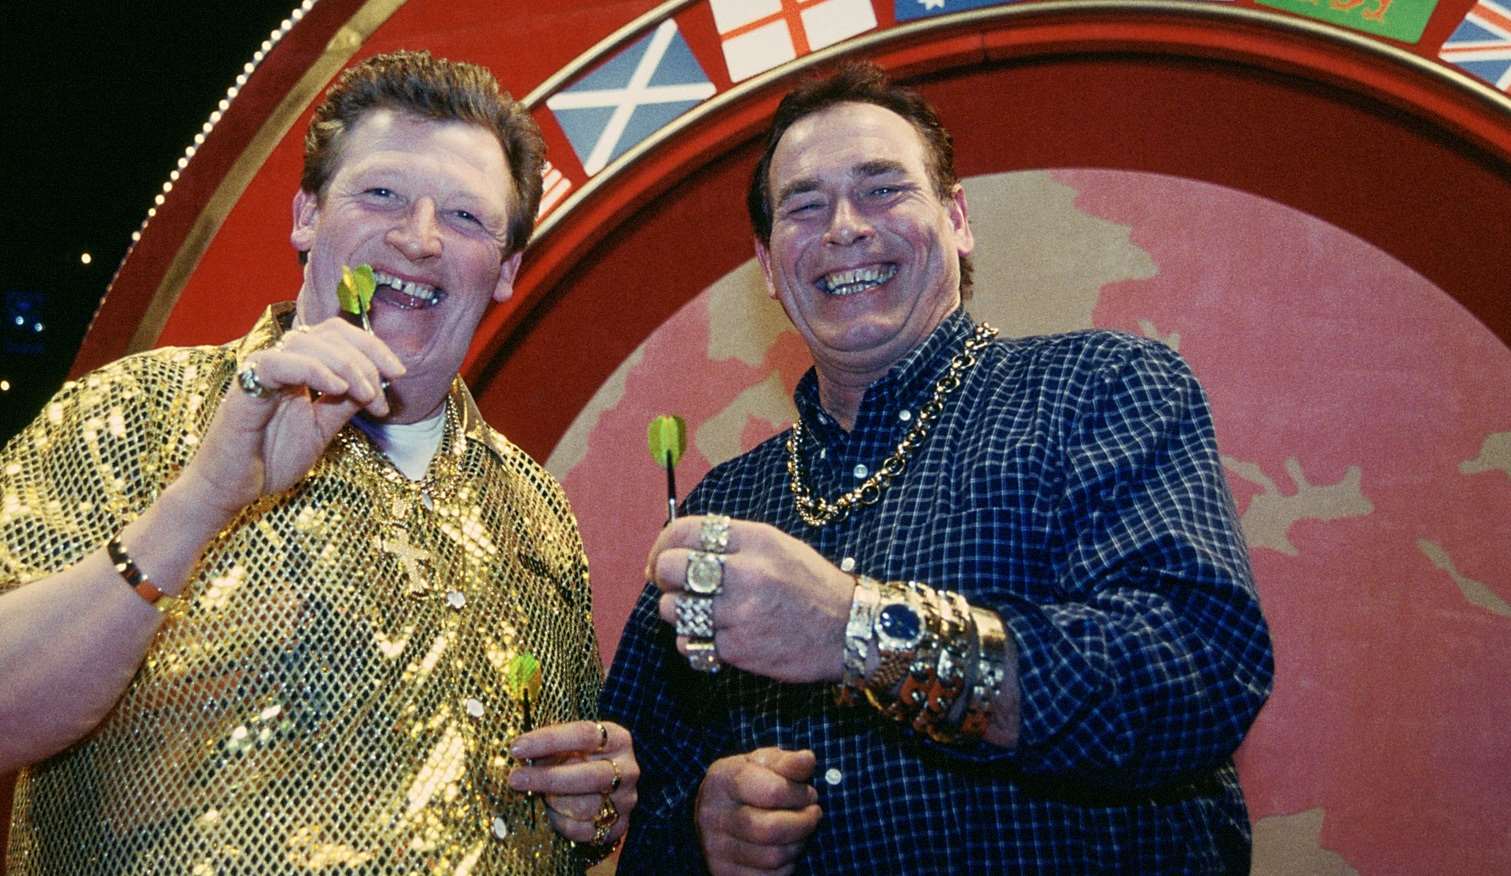 Darts legend Bobby George with Rocky Goldfinger (Geoff Bell) for the film Poisoned Arrows